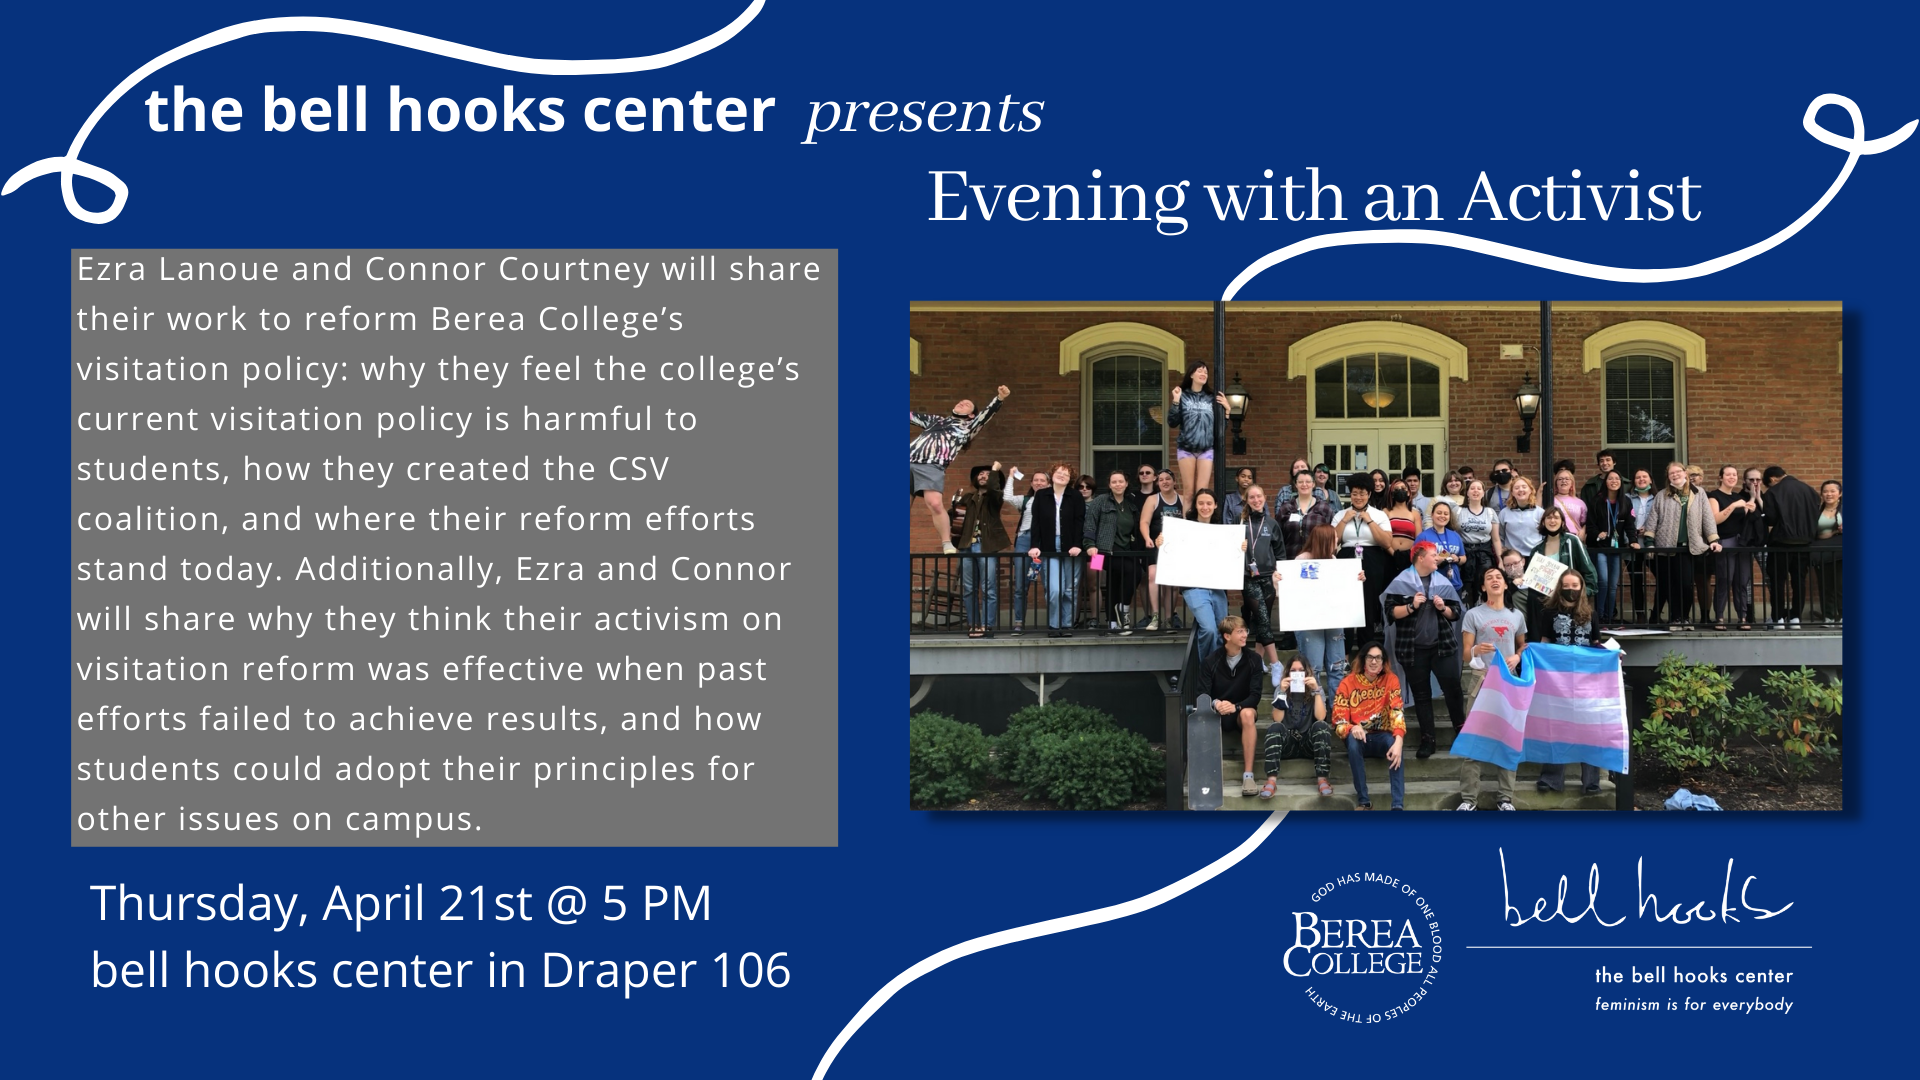 Evening with an Activist featuring Ezra Lanoue and Connor Courtney